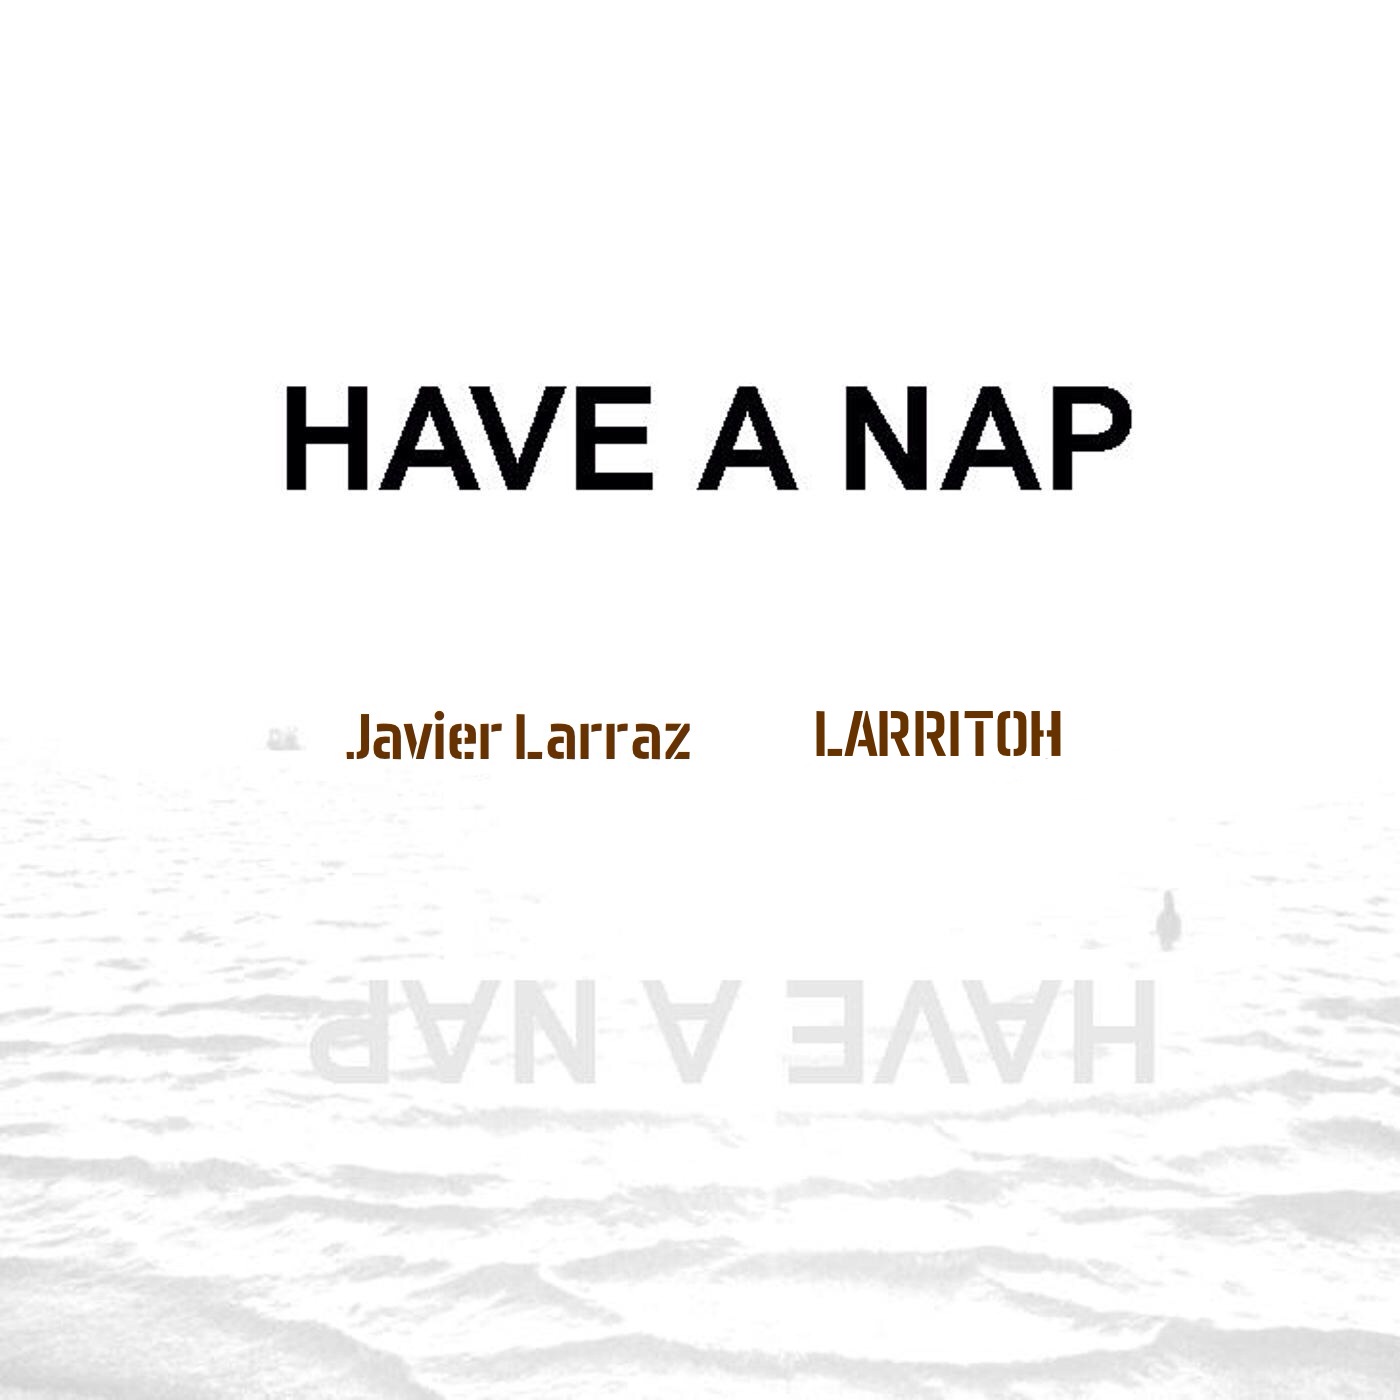 HAVE A NAP